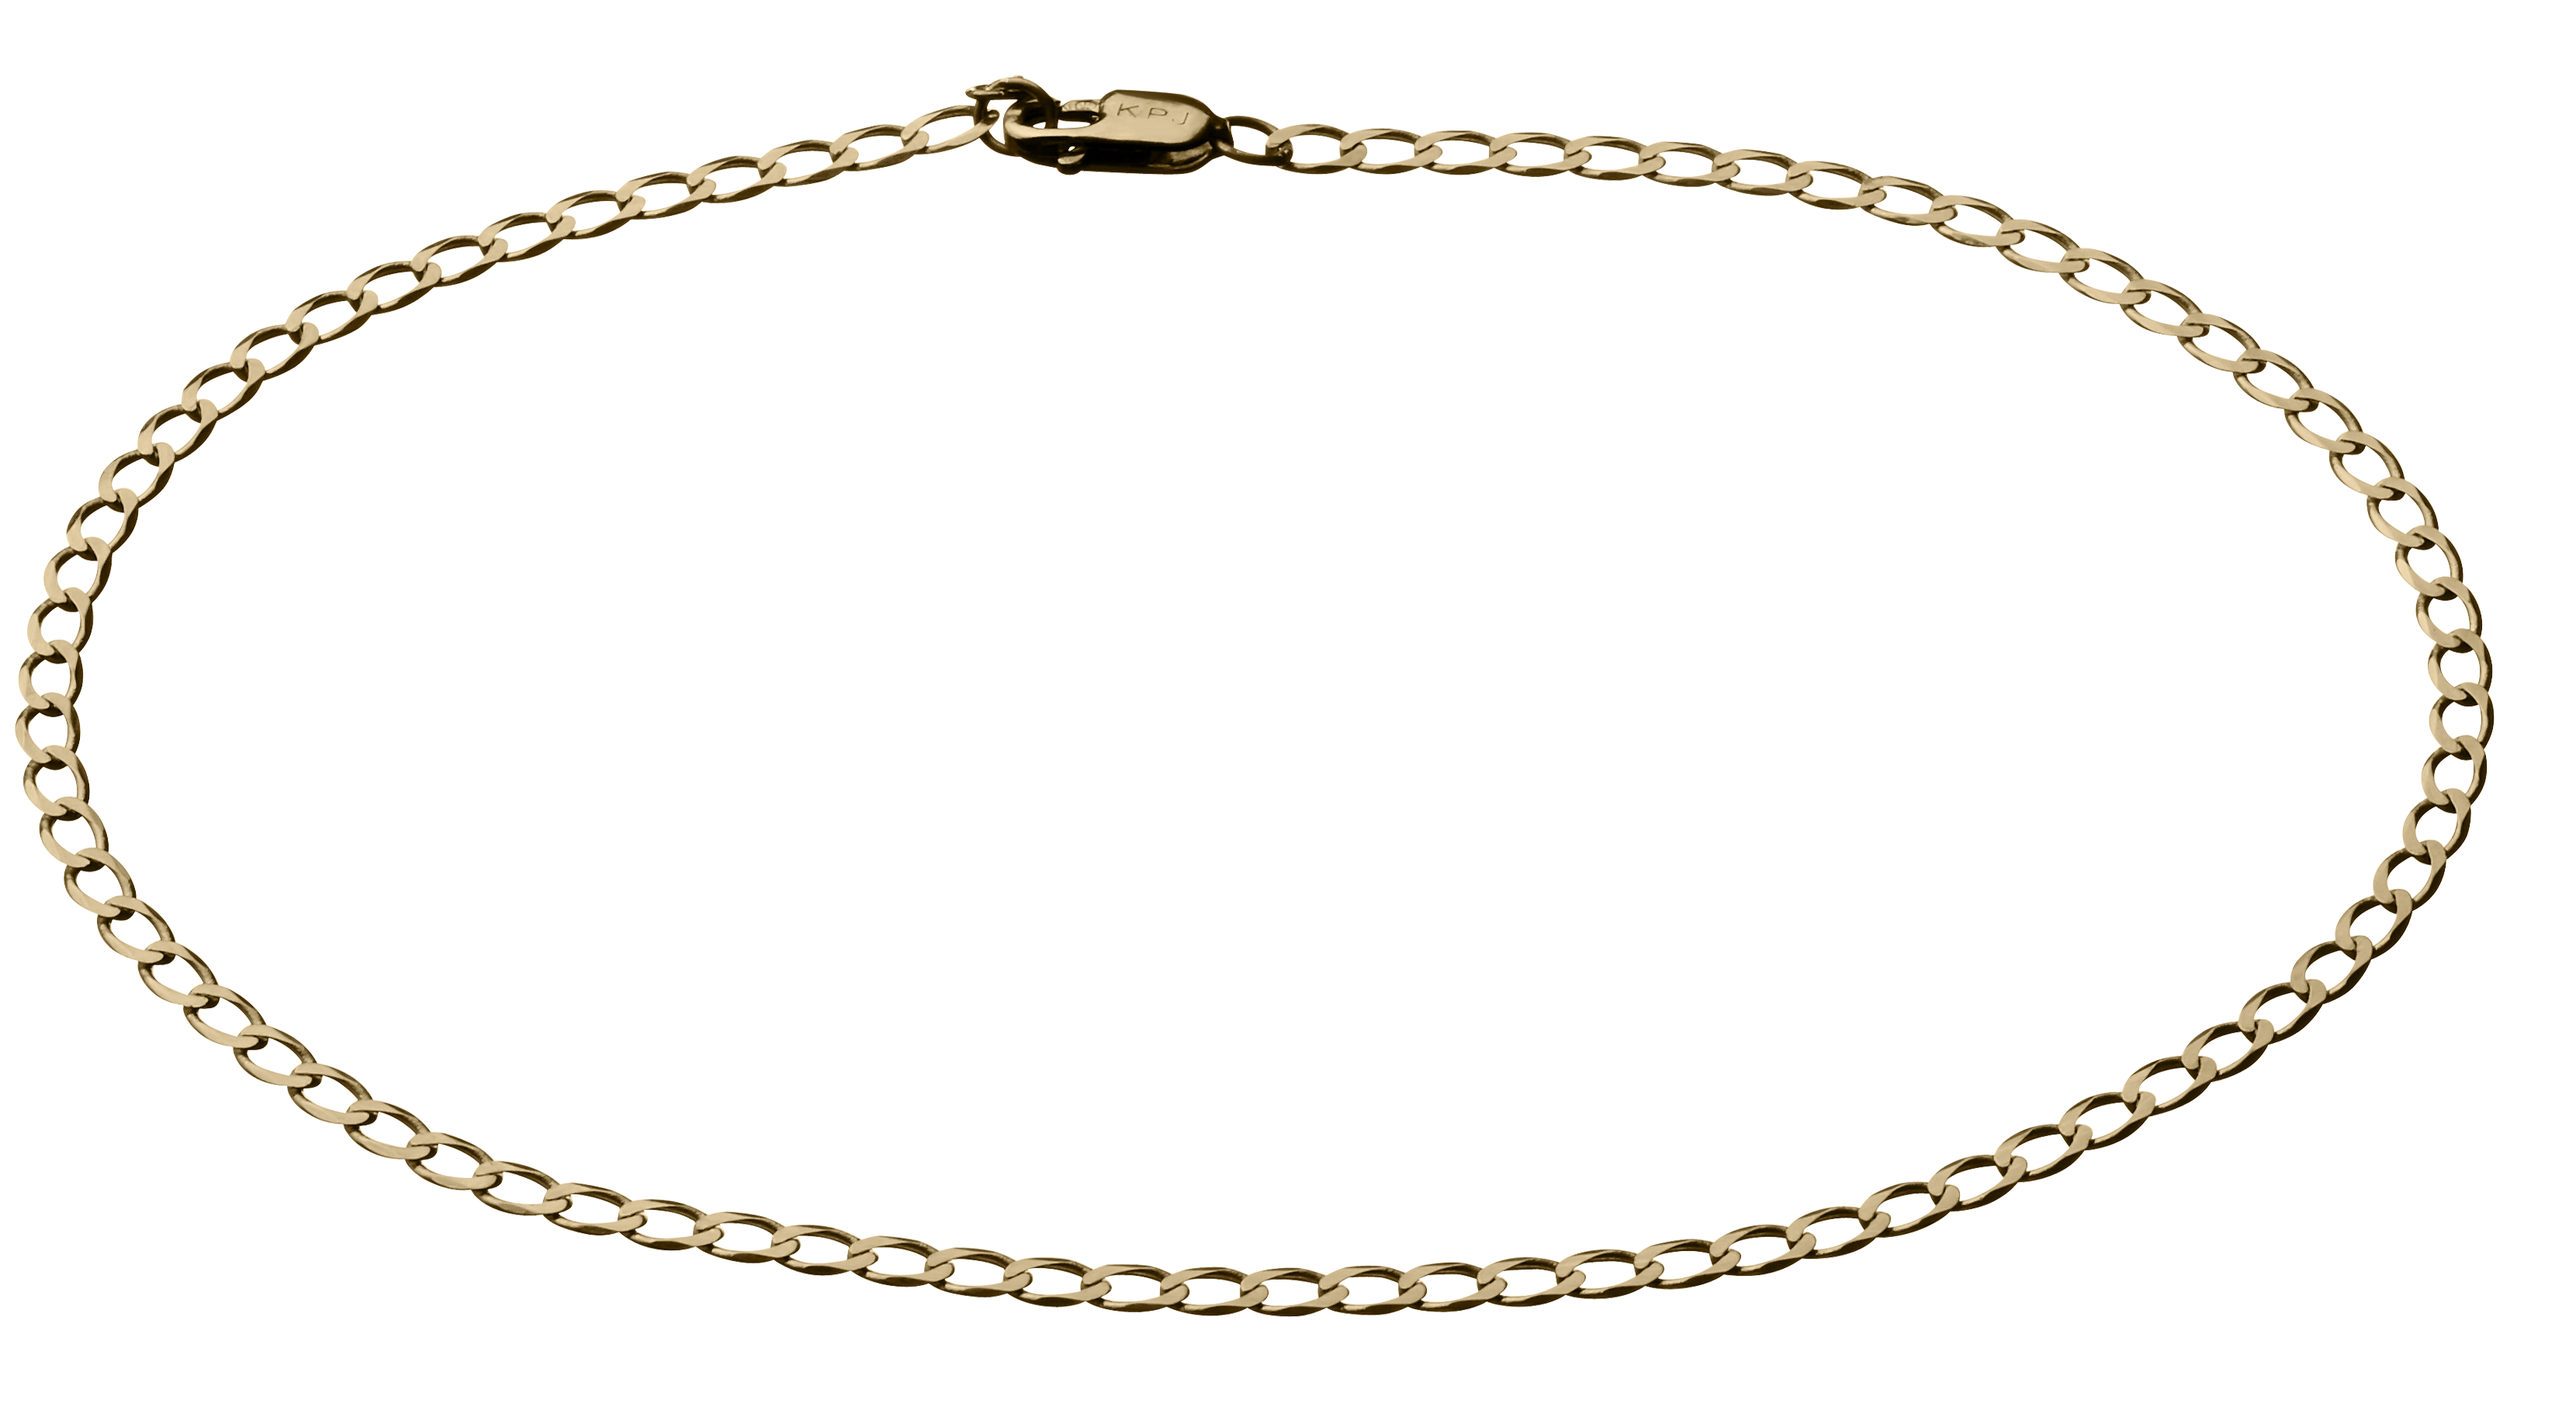 10kt Yellow Gold 10" Adjustable Anklet.....................NOW